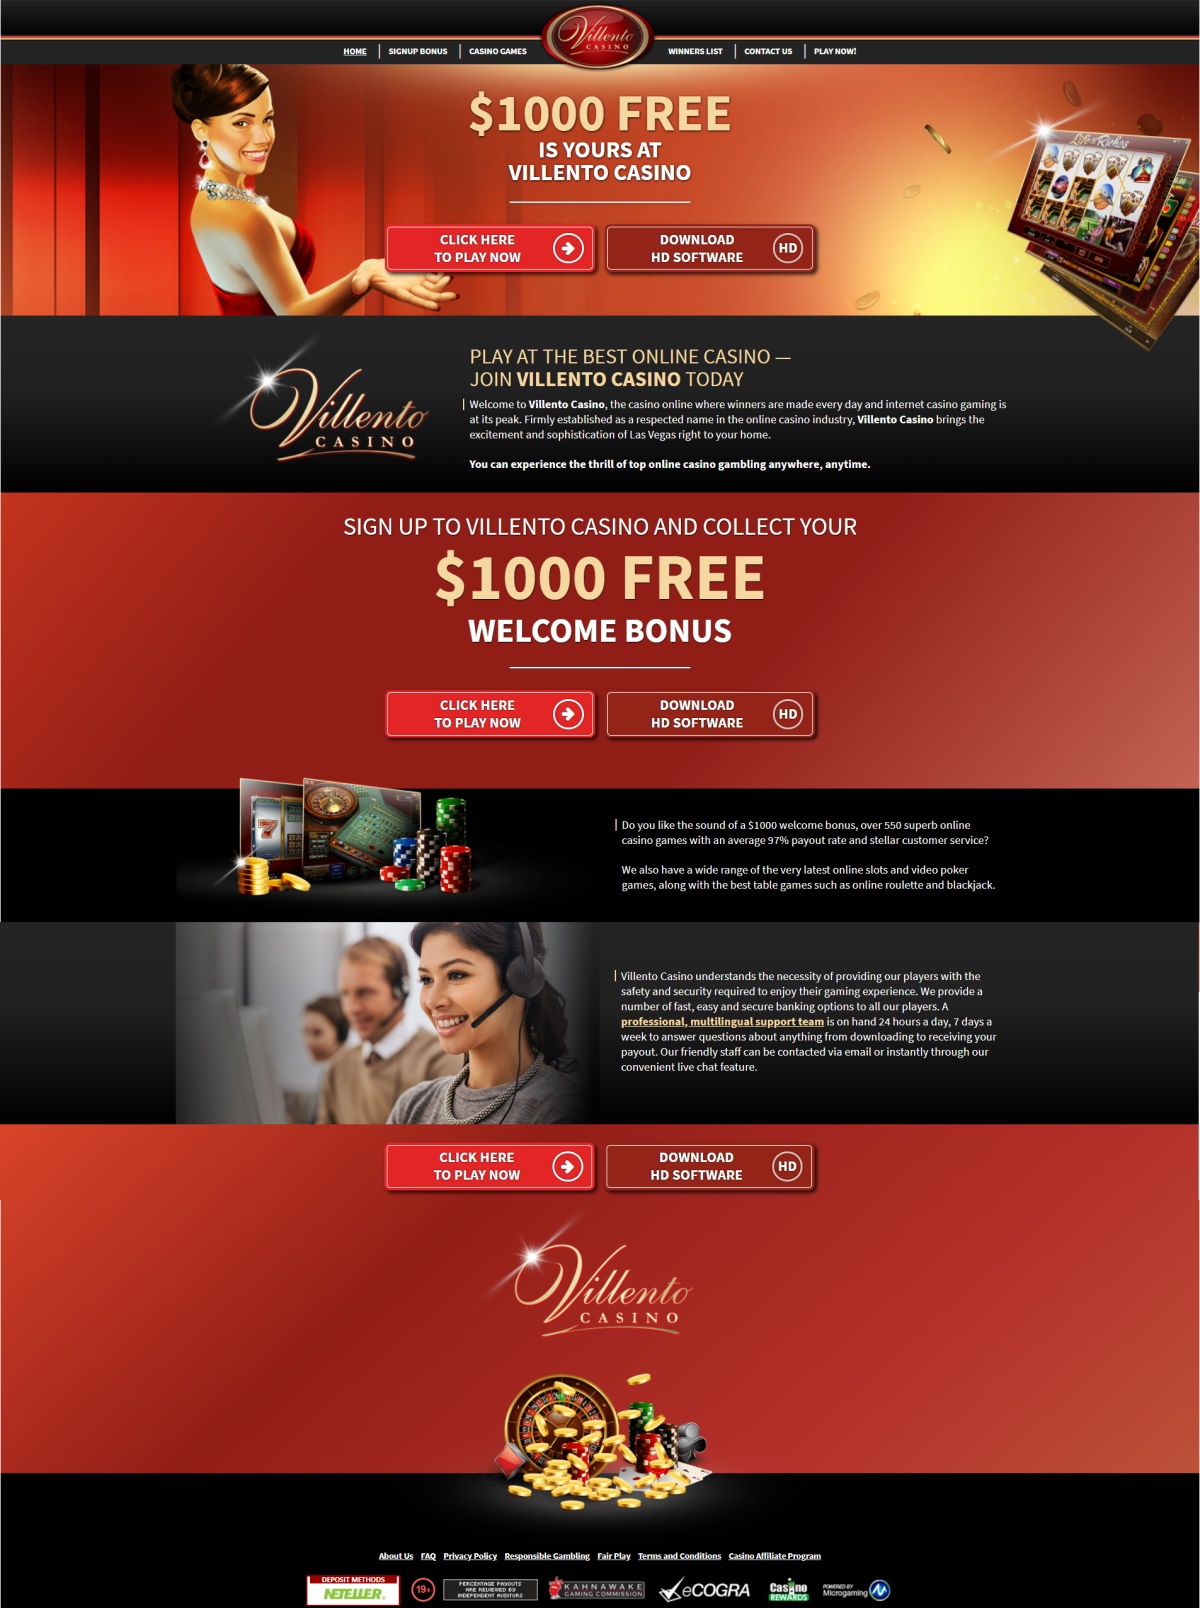 Welcome to Villento Casino, the casino online where winners are made every day and internet casino gaming is at its peak. Firmly established as a respected name in the online casino industry, Villento Casino brings the excitement and sophistication of Las Vegas right to your home. You can experience the thrill of top online casino gambling anywhere, anytime.